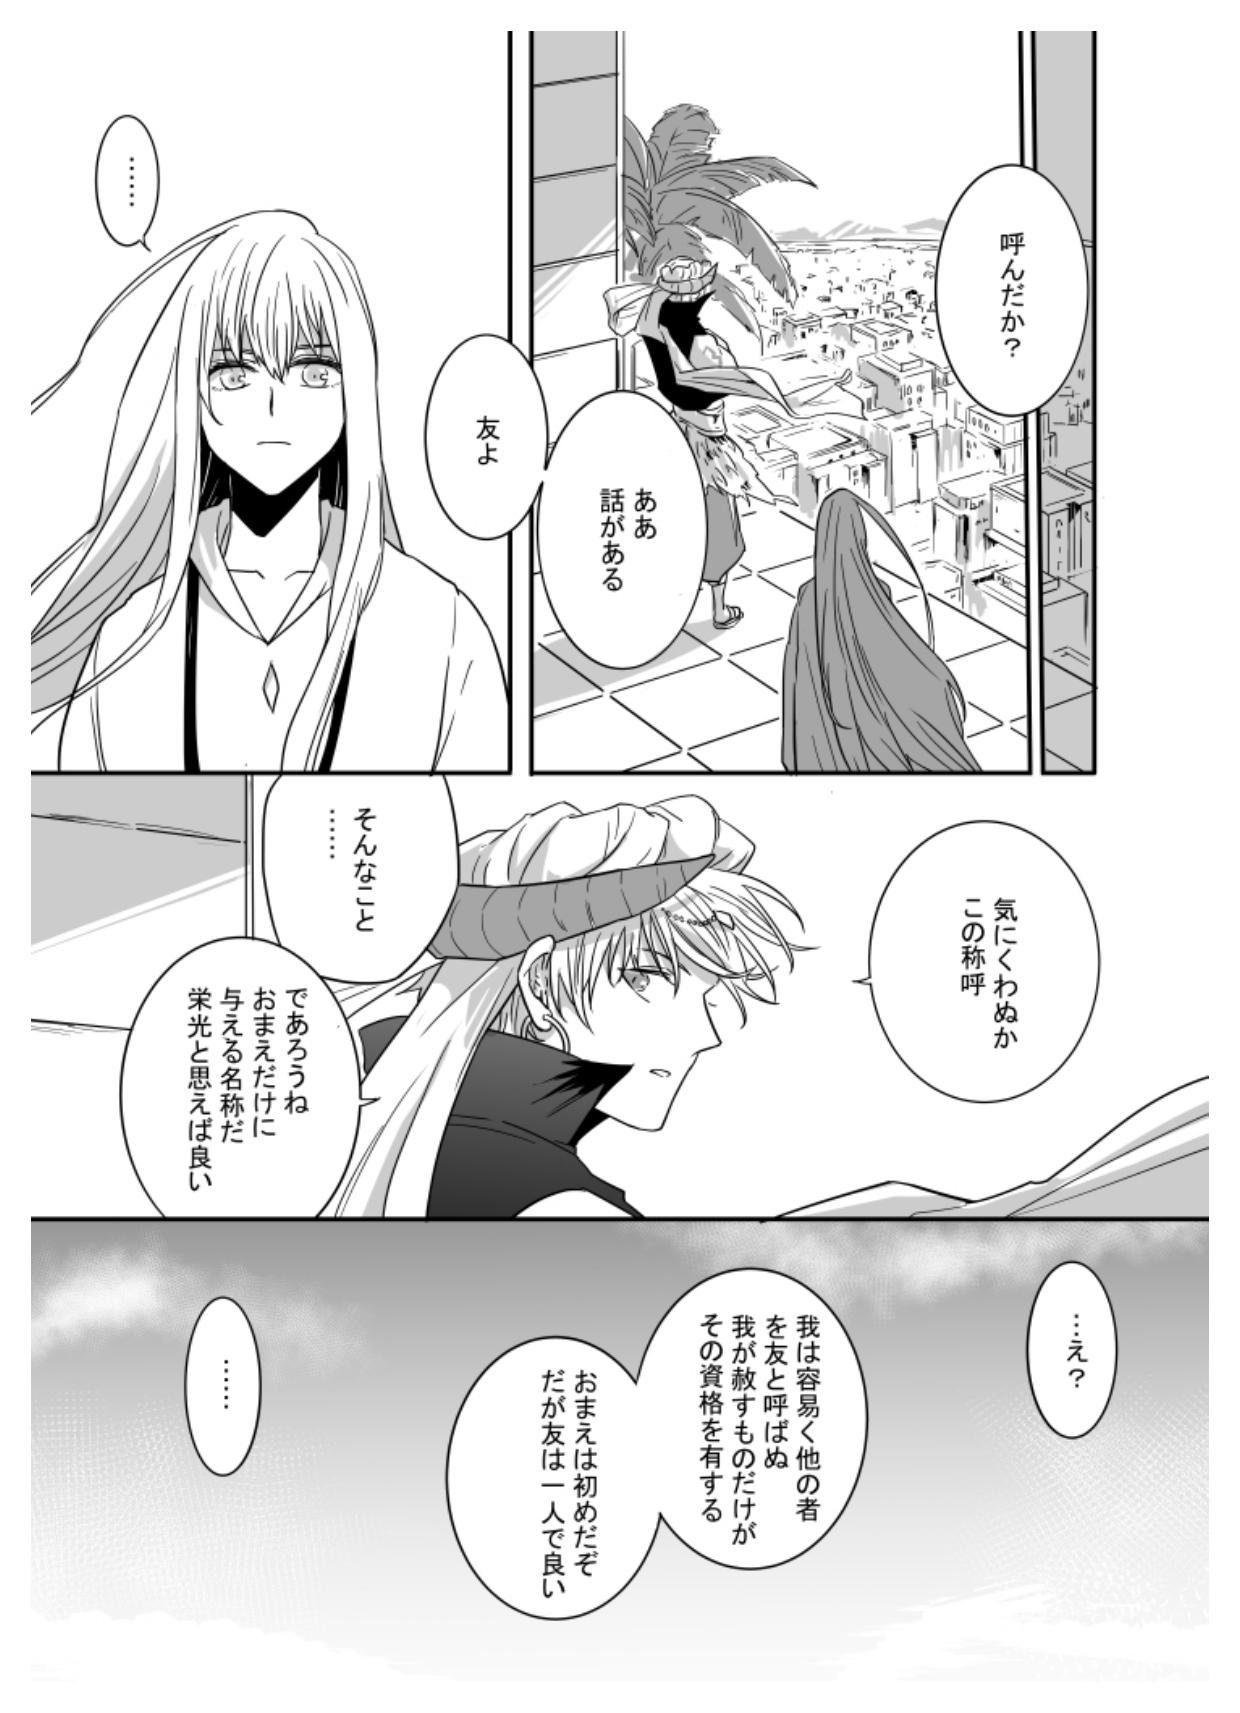 Online If I have soul - Fate grand order Sex Toys - Page 11